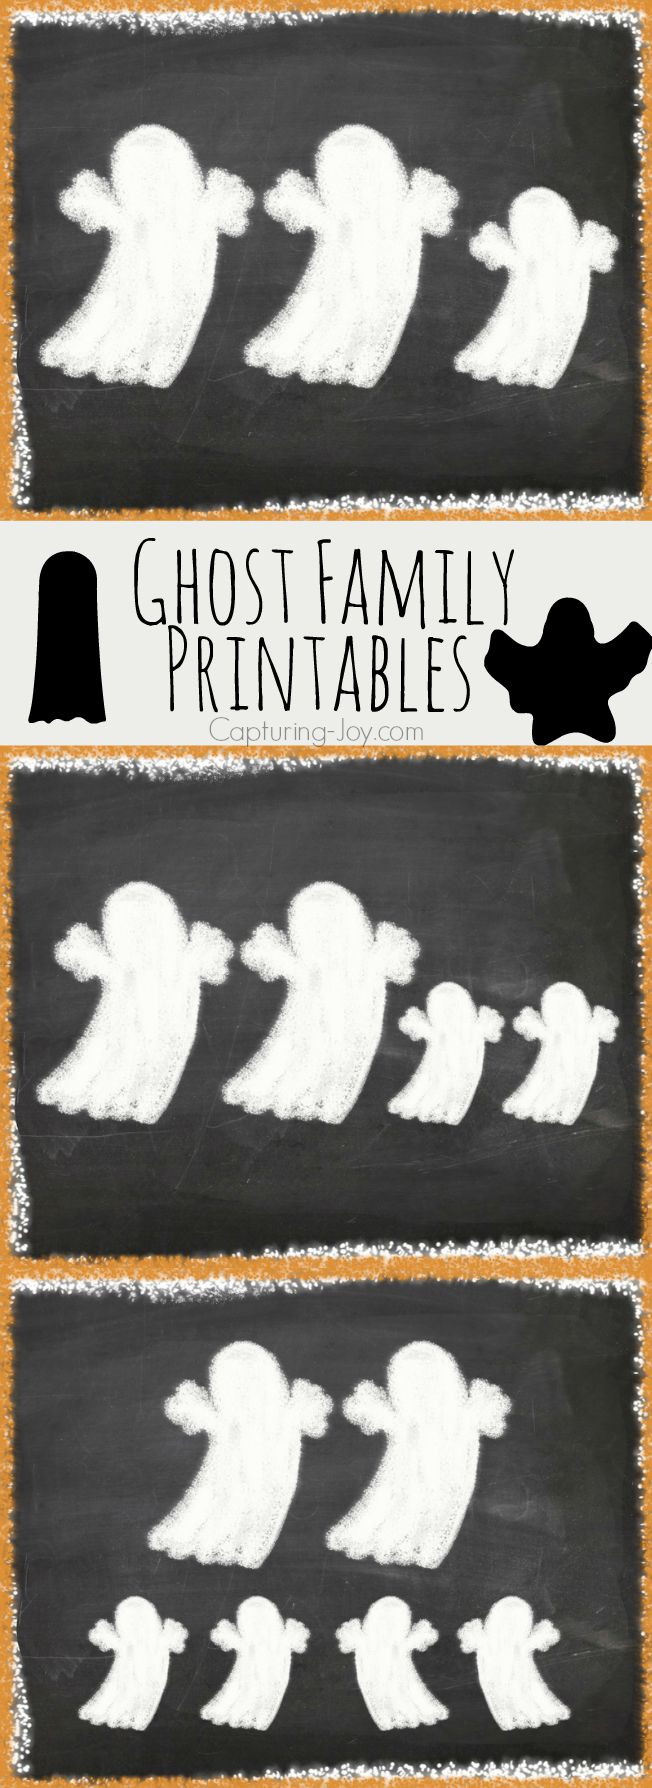 Ghost Family Printables